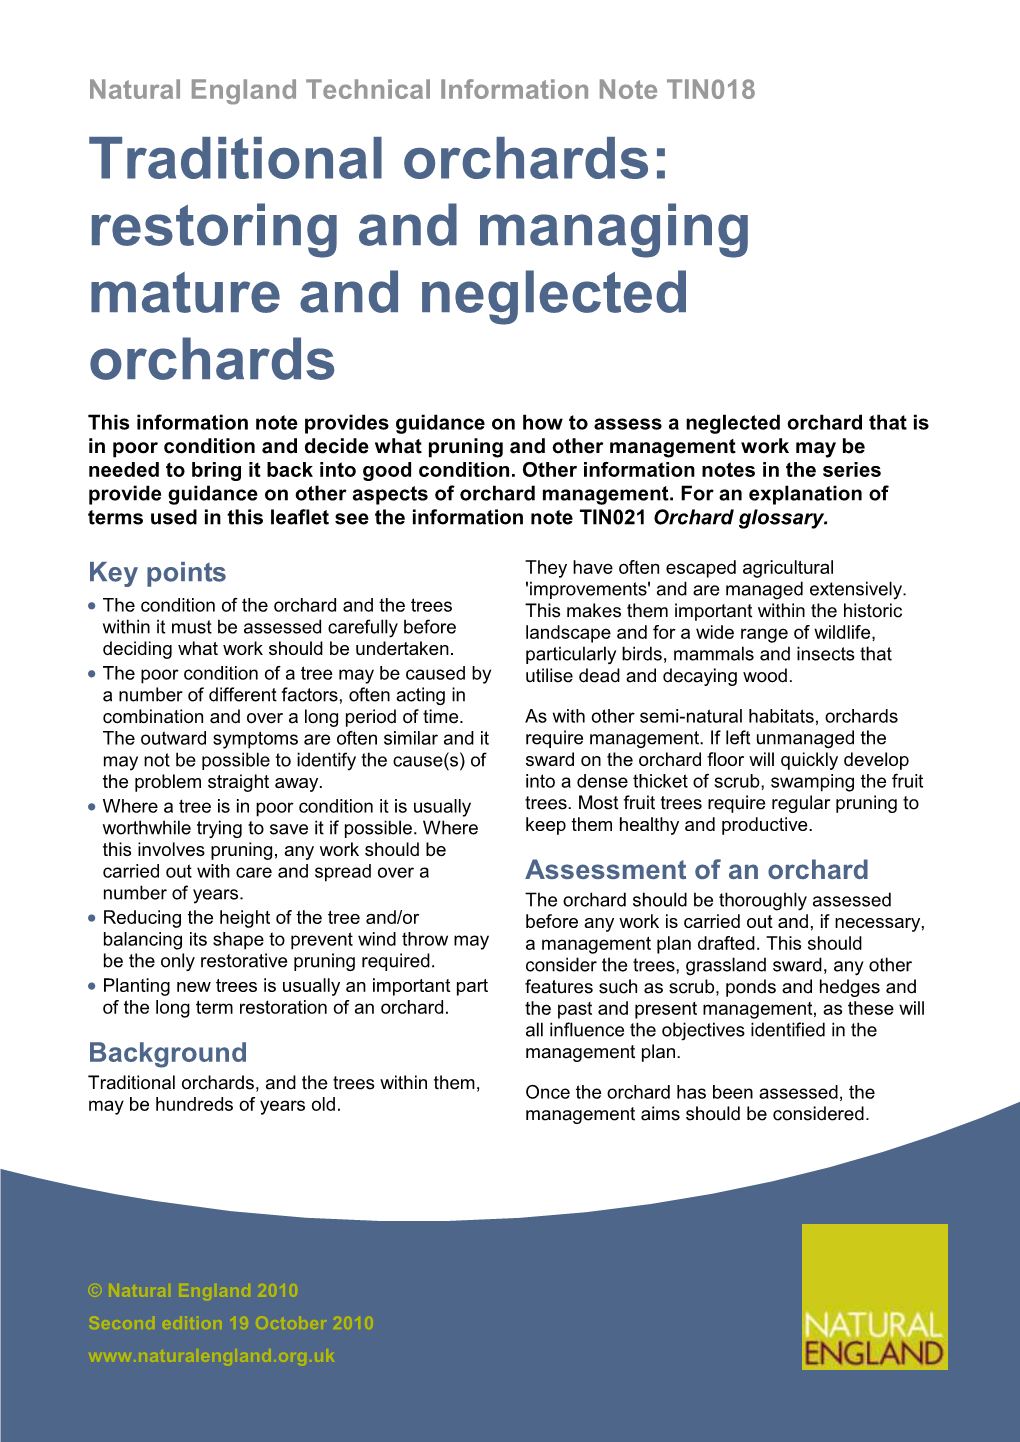 Traditional Orchards: Restoring and Managing Mature and Neglected Orchards